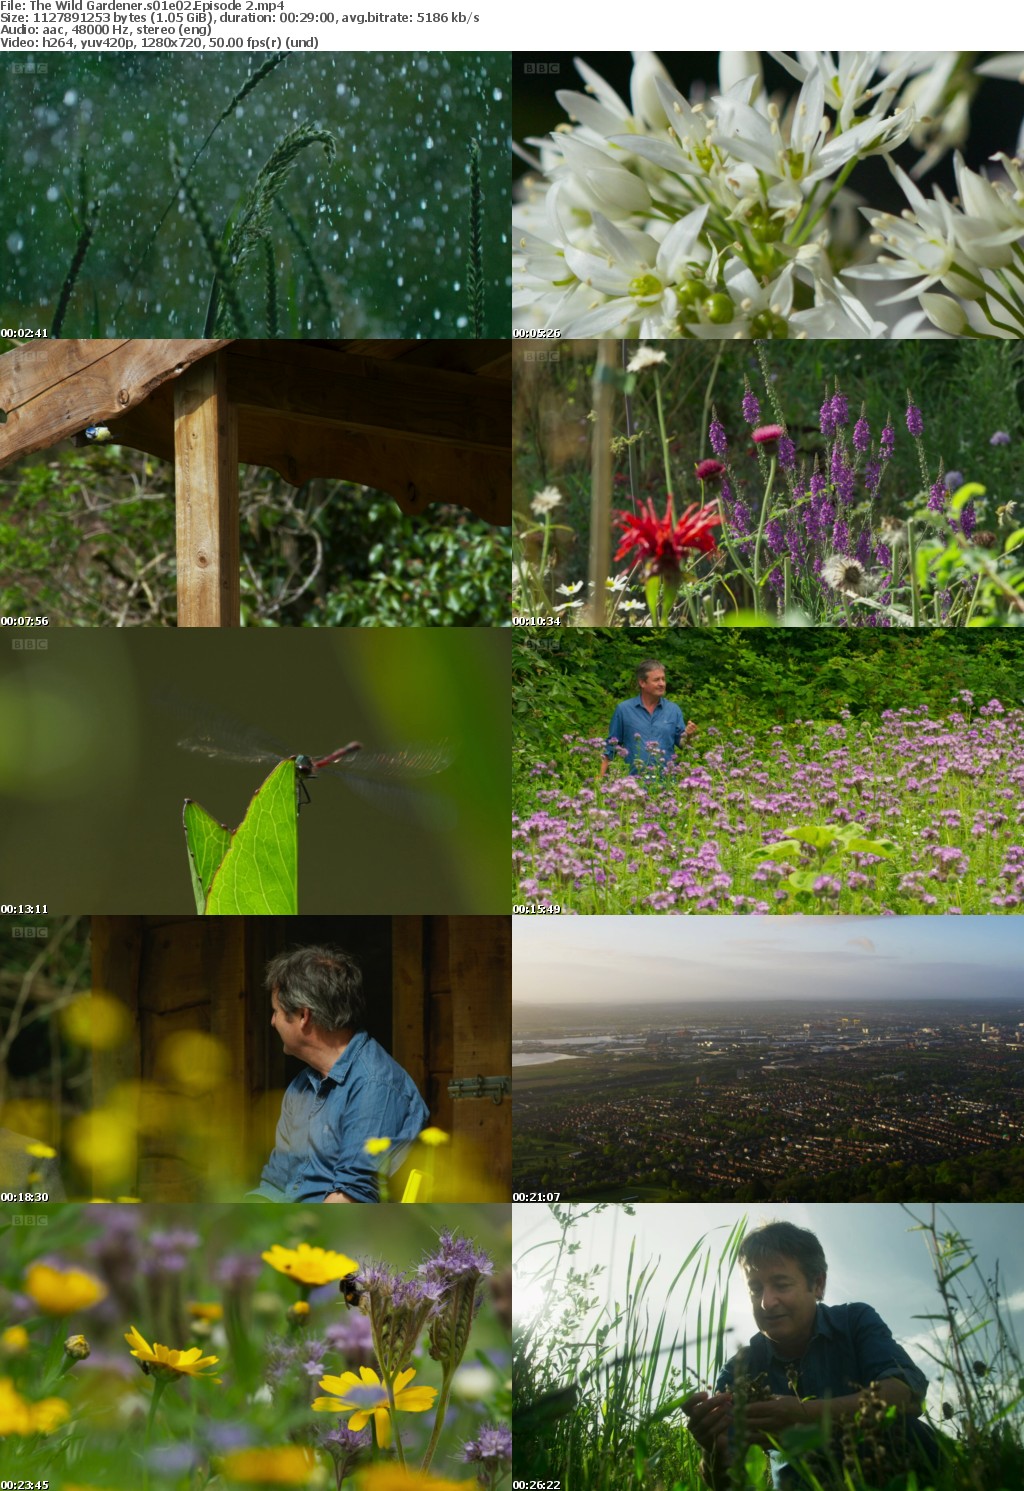 The Wild Gardener S01 complete (1280x720p HD, 50fps, soft Eng subs)